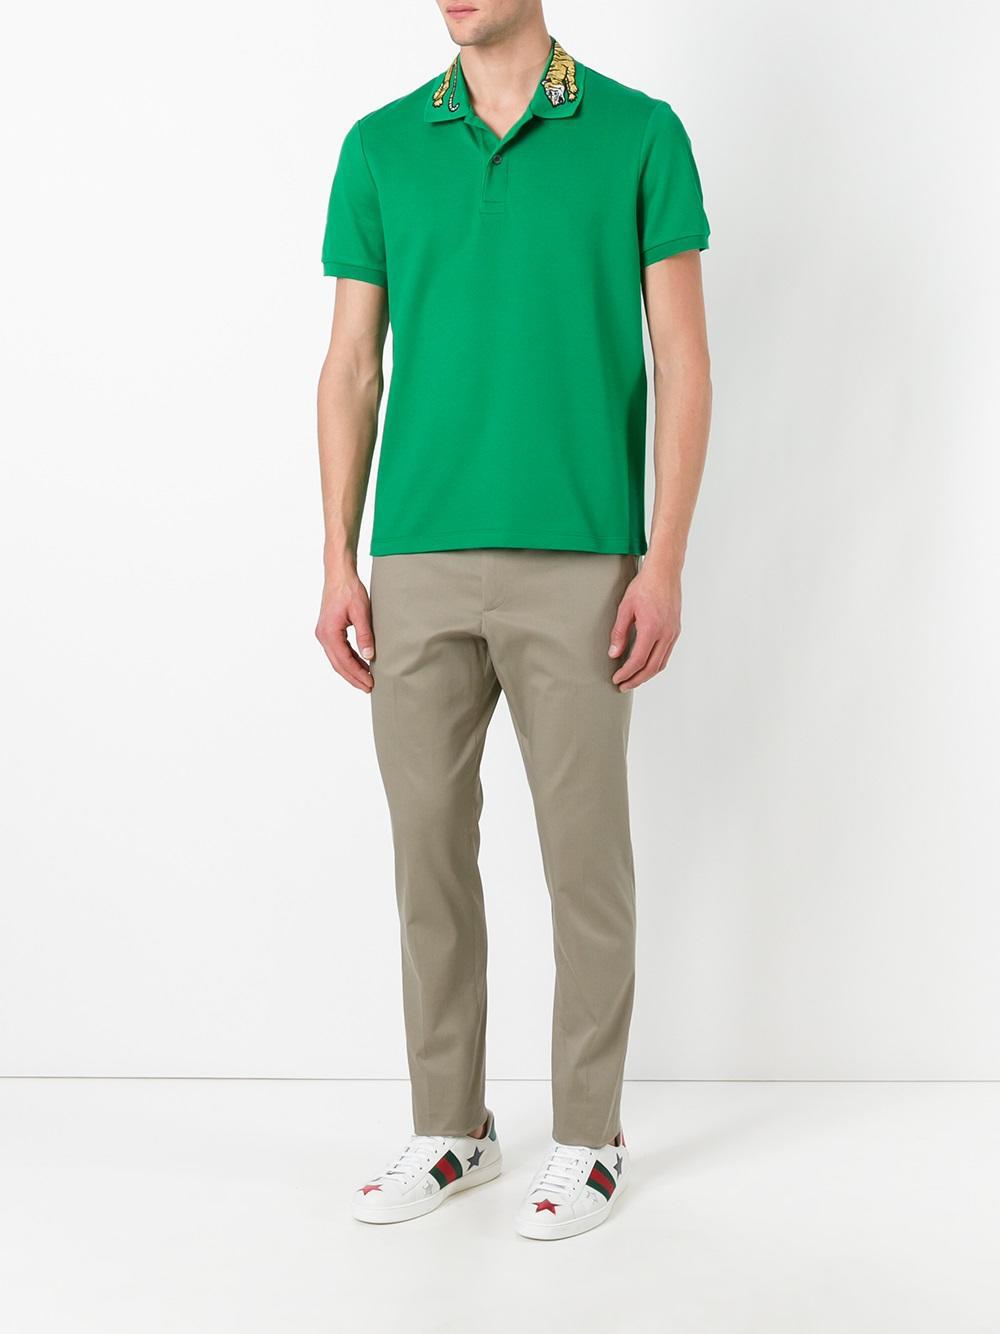 Lyst - Gucci Tiger Embroidered Polo Shirt in Green for Men